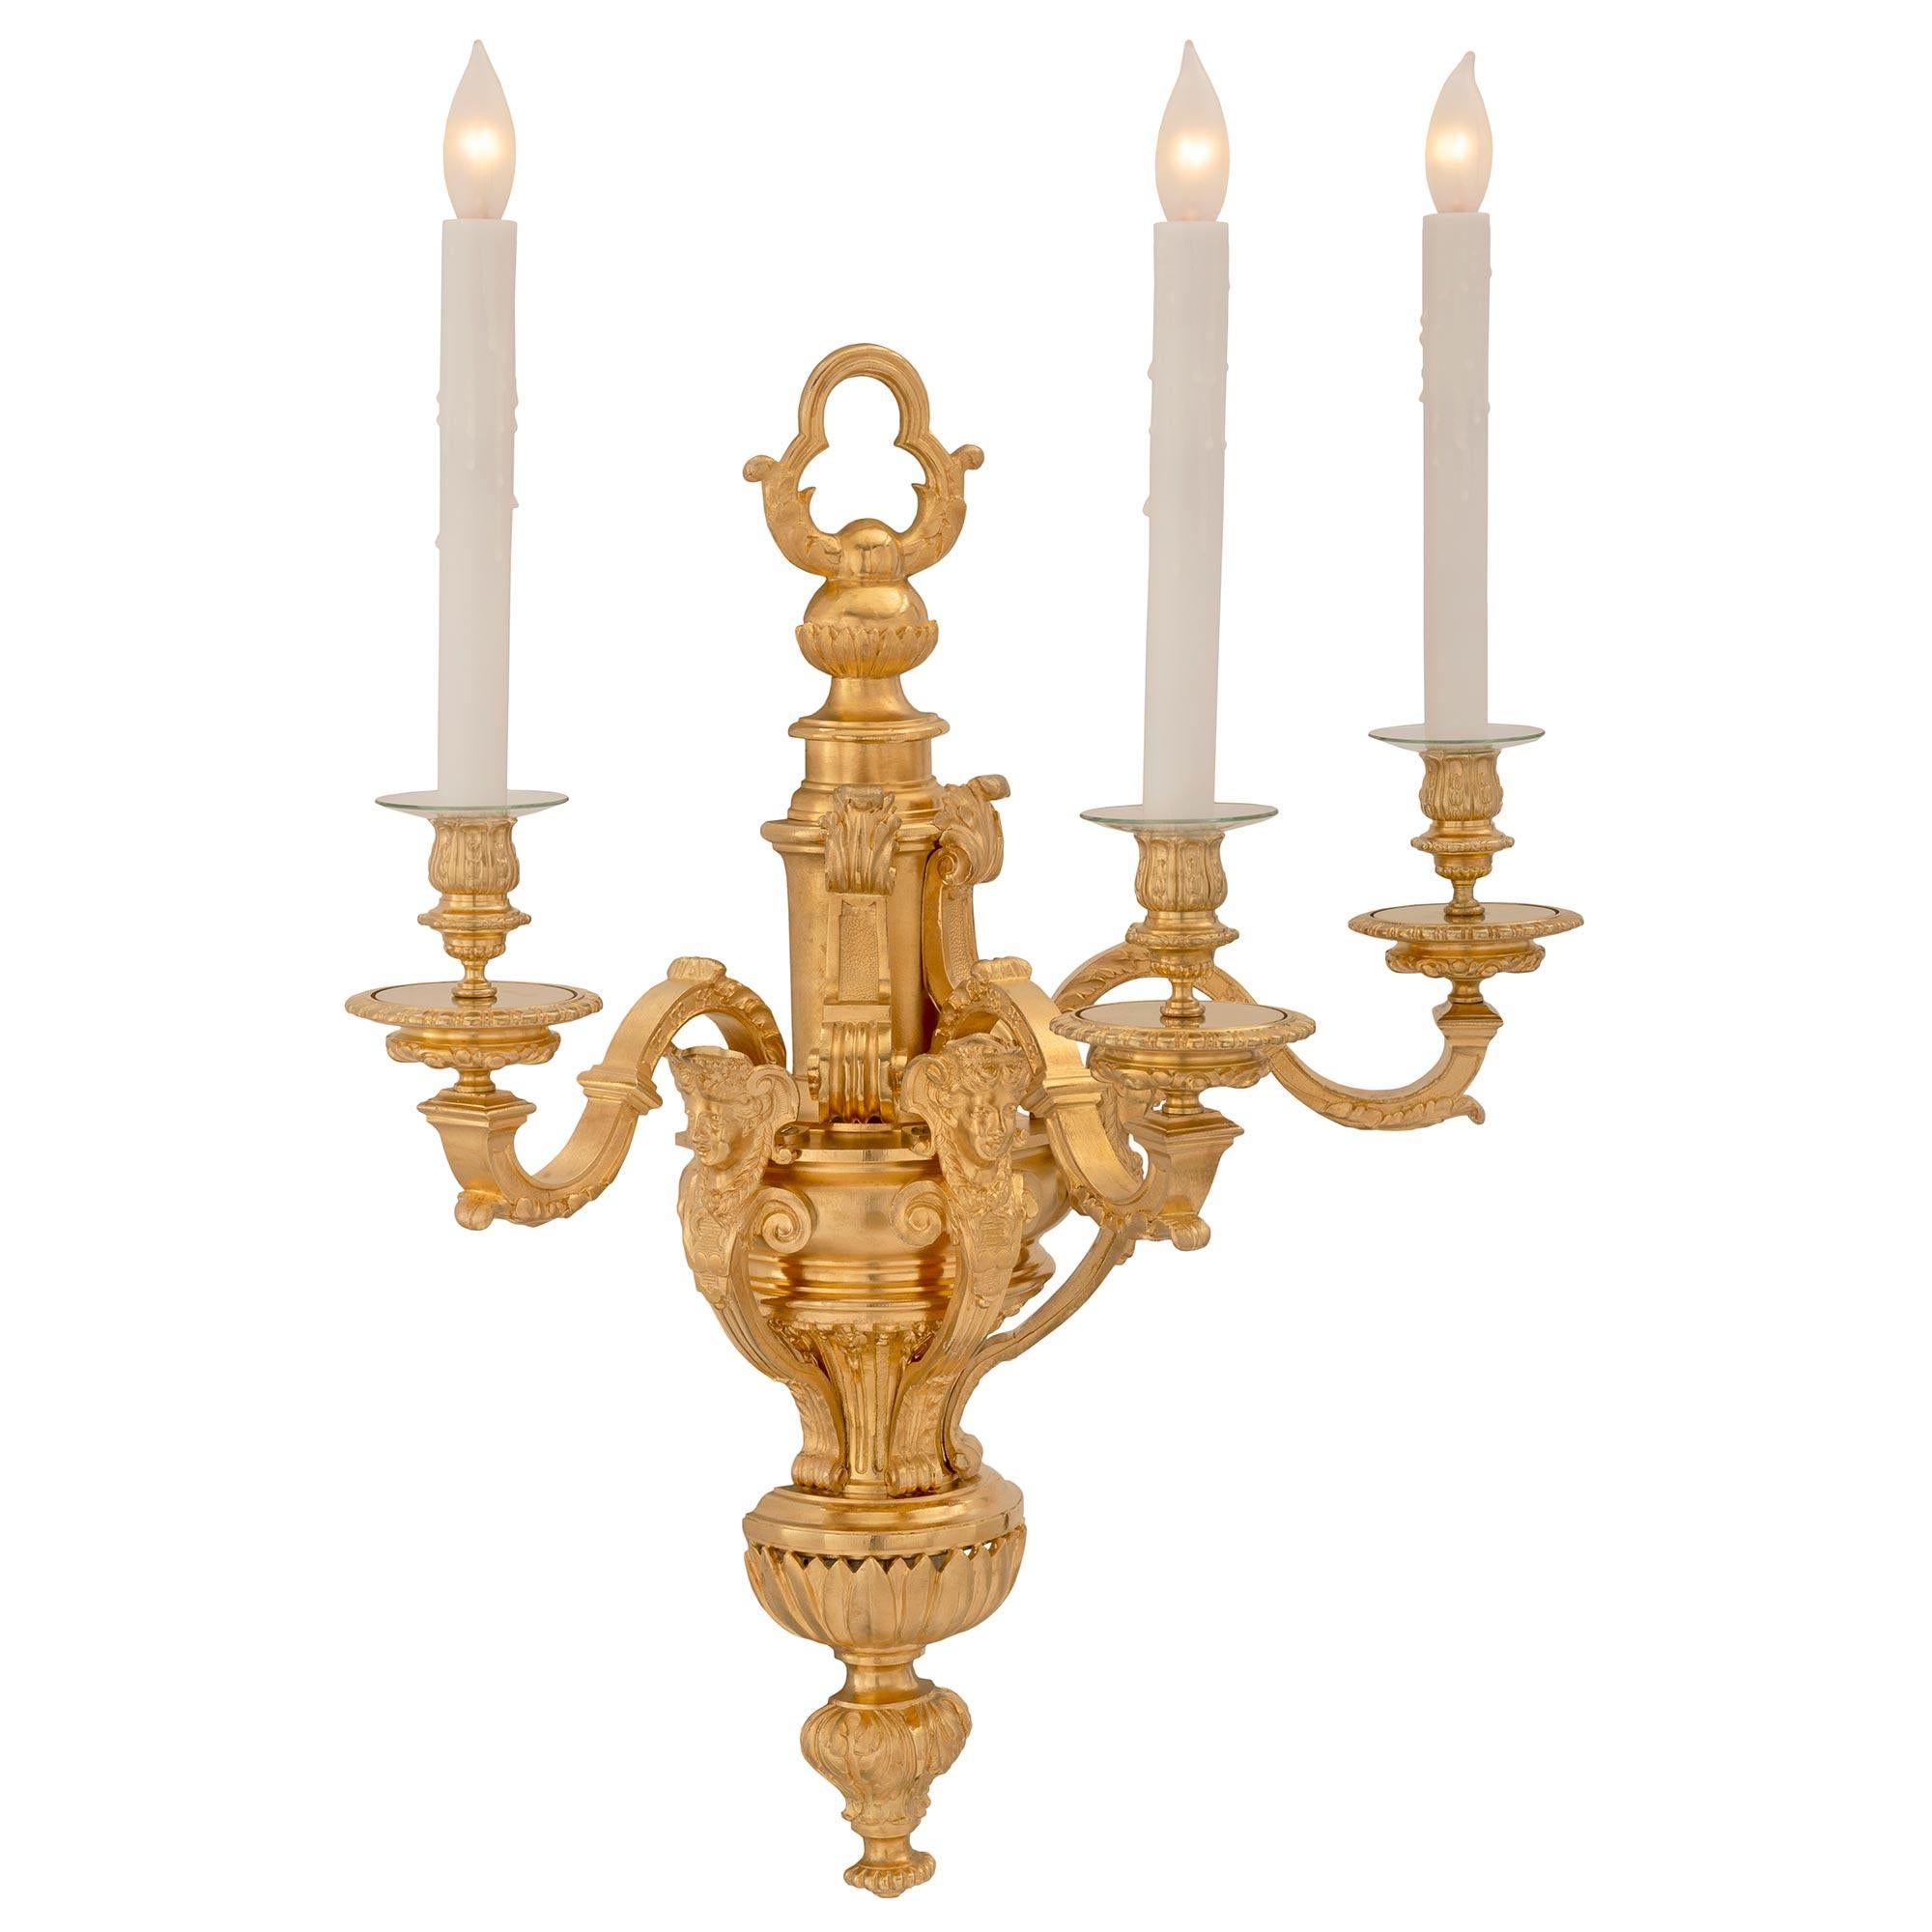 An impressive and high quality complete set of four French 19th century Louis XVI st. ormolu sconces. Each large scale three arm sconce is centered by a lovely foliate bottom finial with an elegant urn shape decorated with fine palmettes. Three